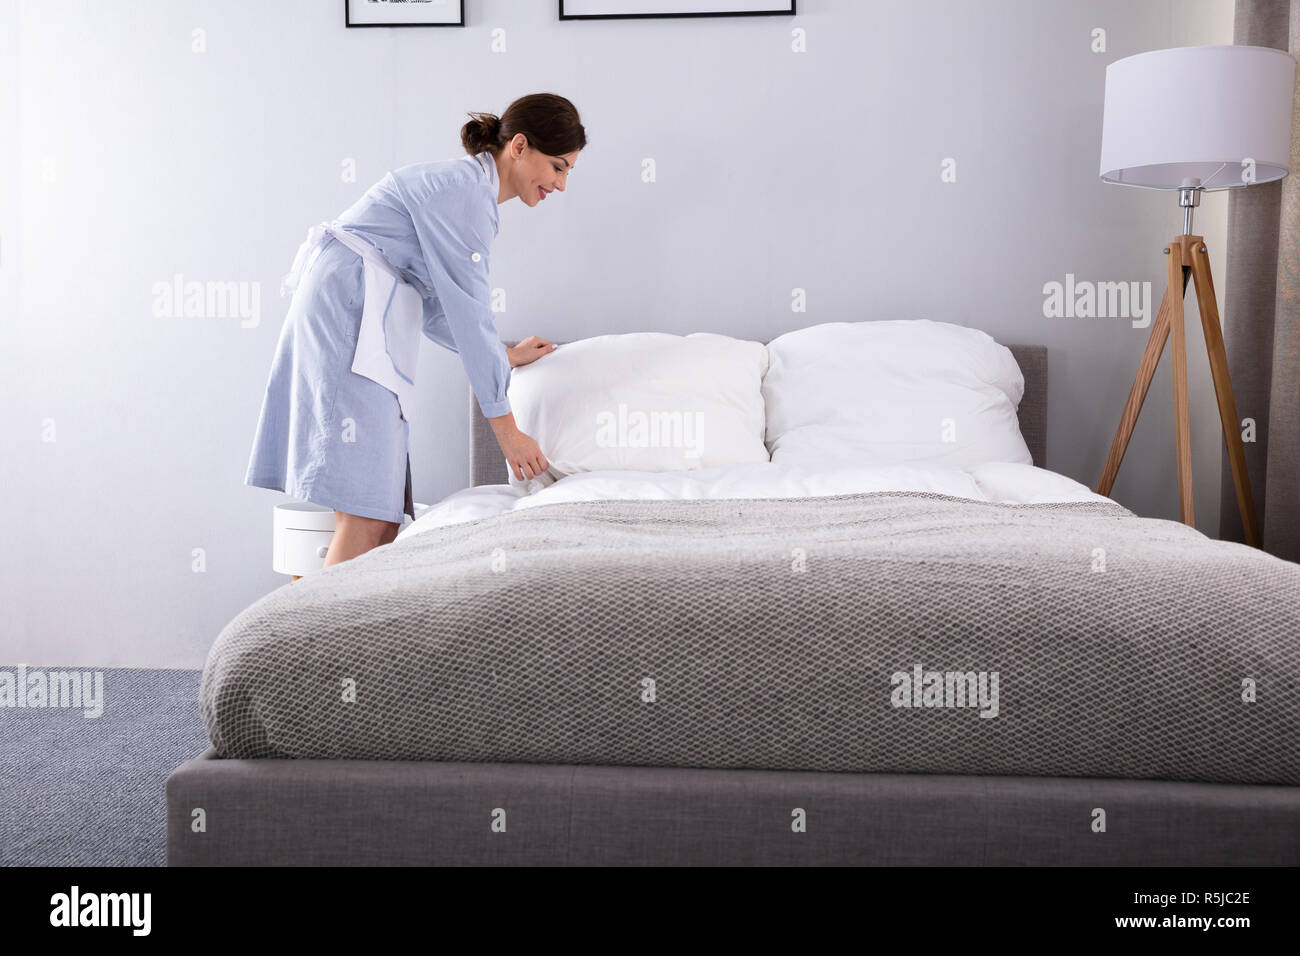 Smiling Female Housekeeper Making Bed In Hotel Room Stock Photo